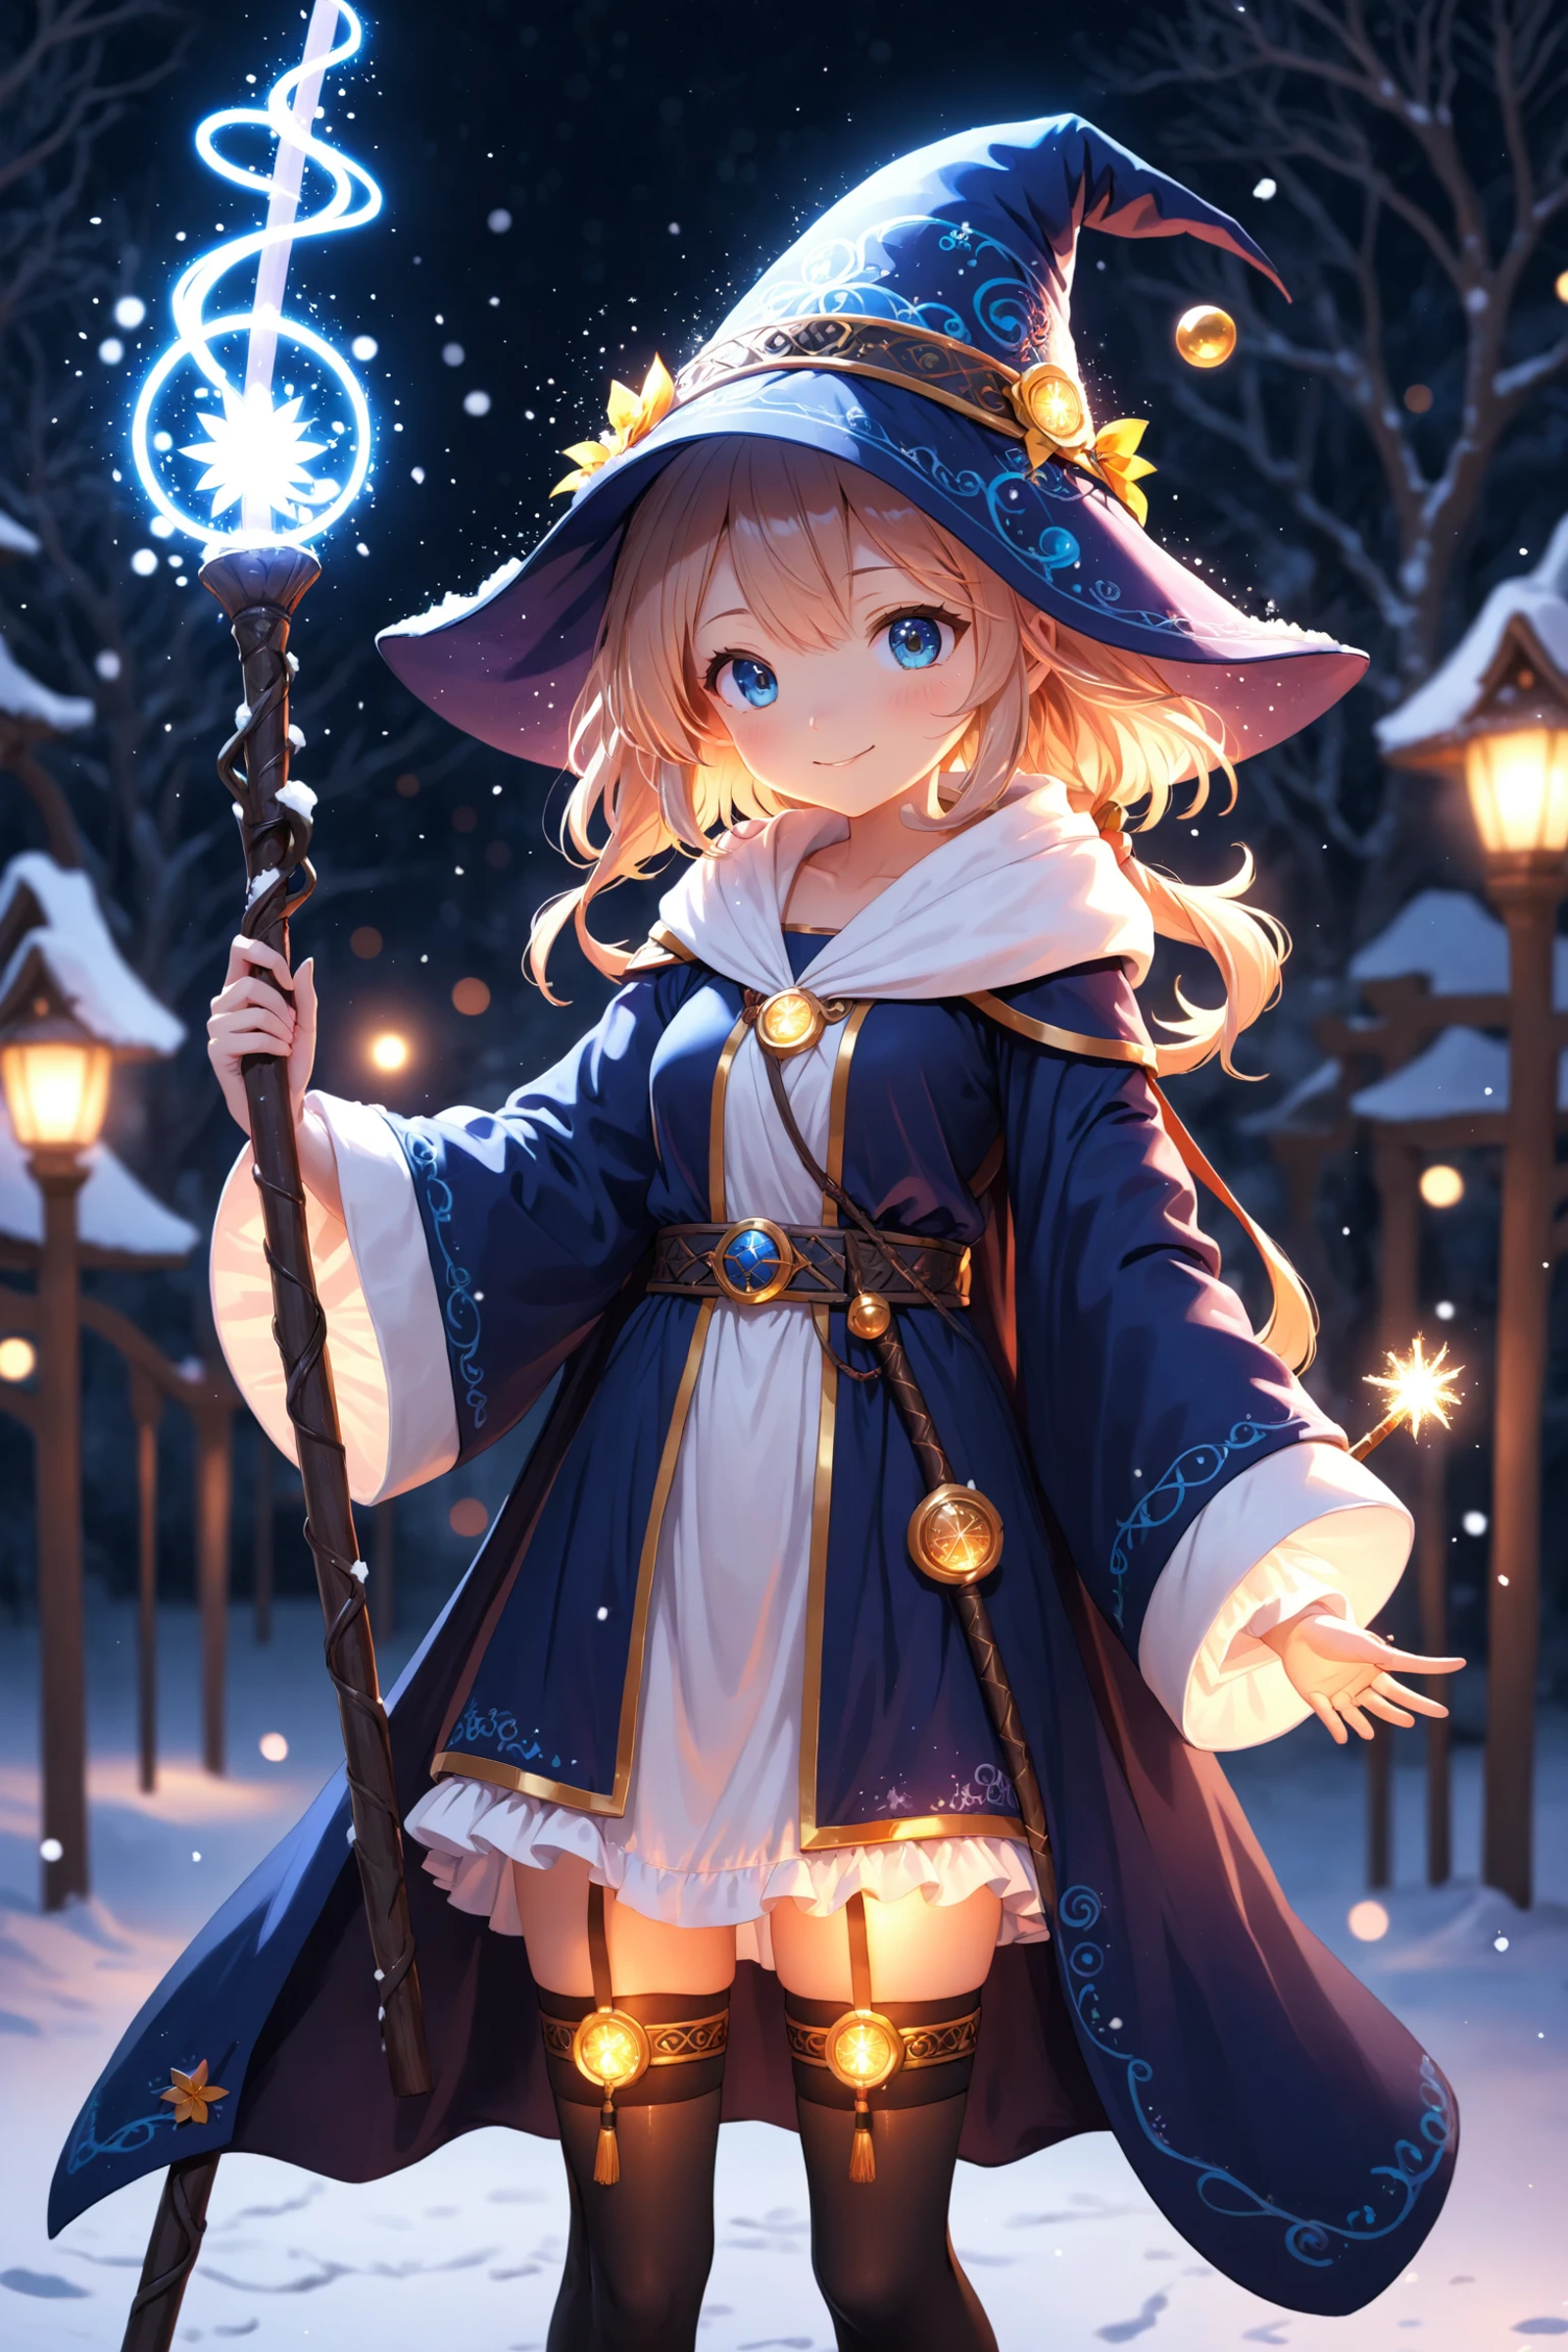 Anime-style drawing of a girl in a blue dress and yellow hat holding a wand and a blue light.